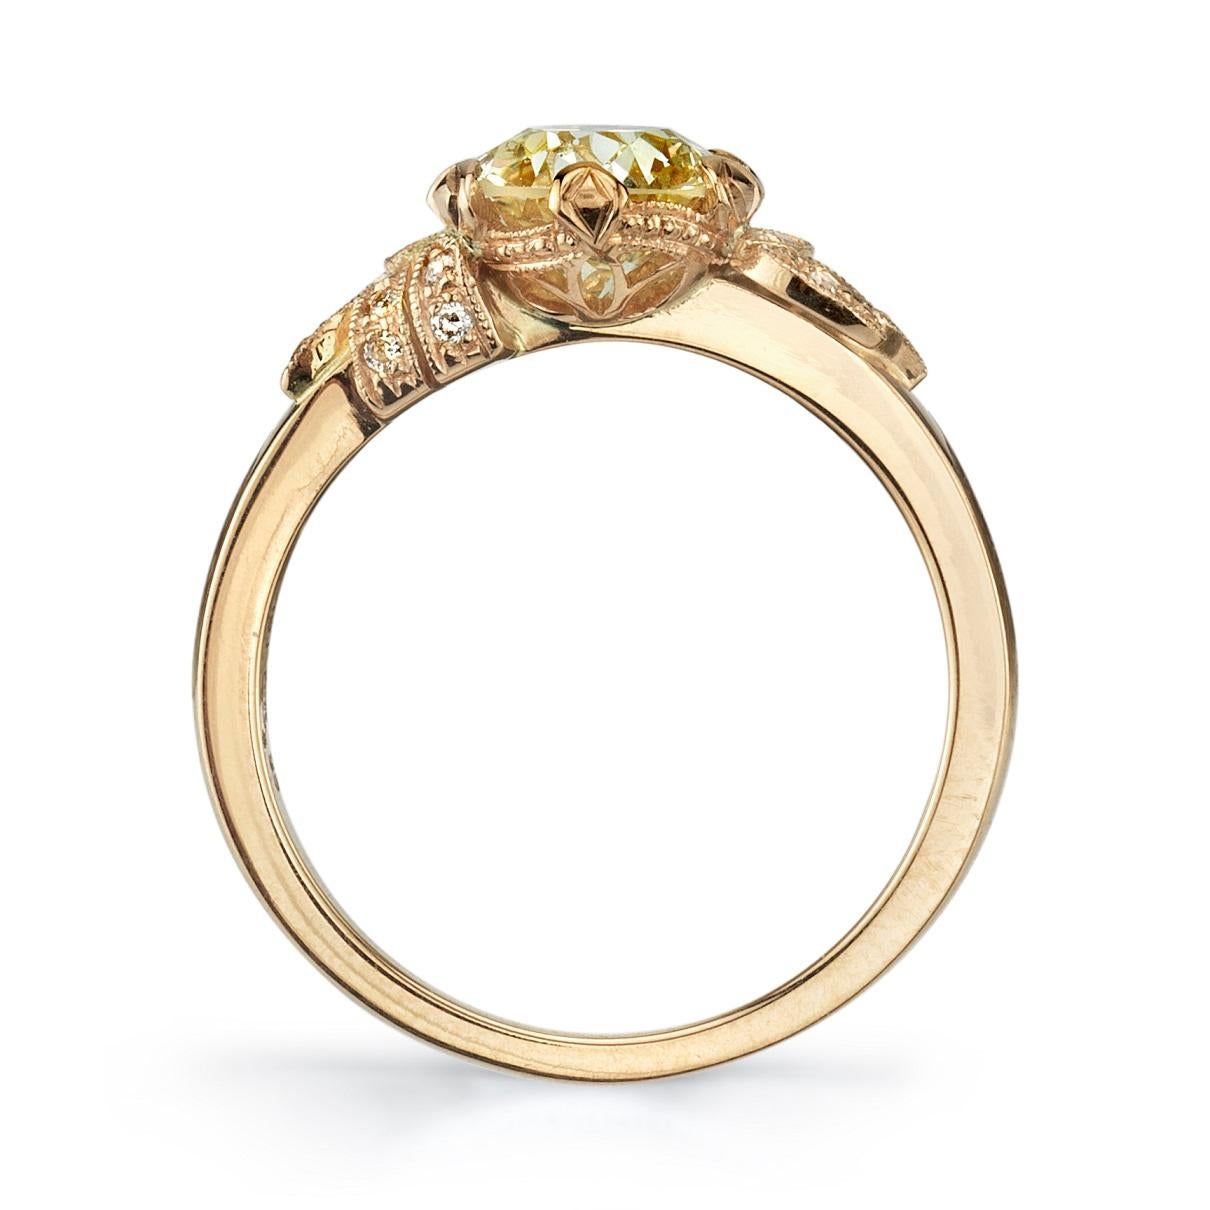 Victorian 1.50 Carat Old European Cut Diamond in a Handcrafted 18k Gold Floral Design Ring